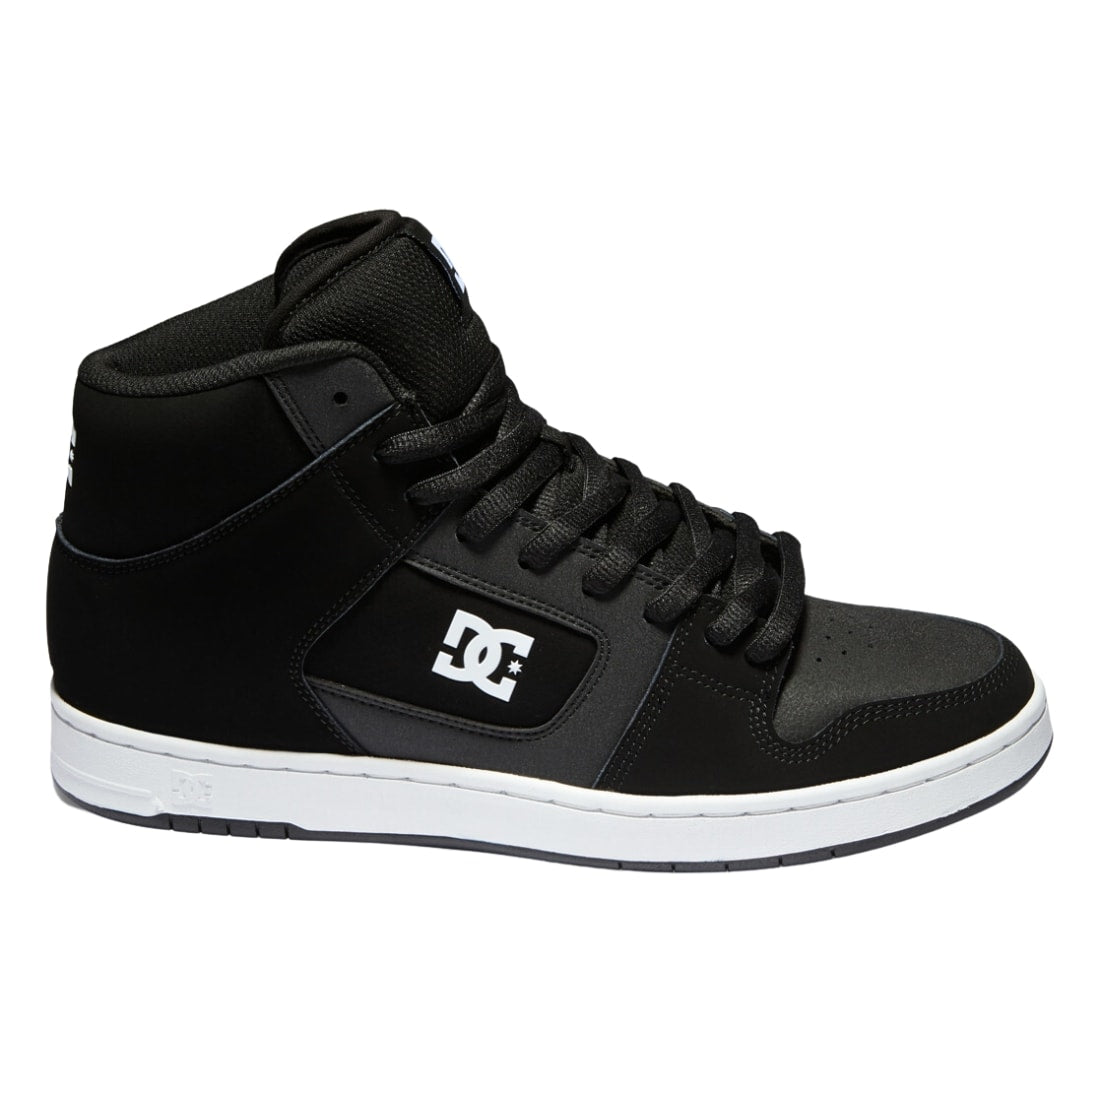 DC Manteca 4 Hi-Top Shoes - Black/White - Mens High Top Trainers by DC